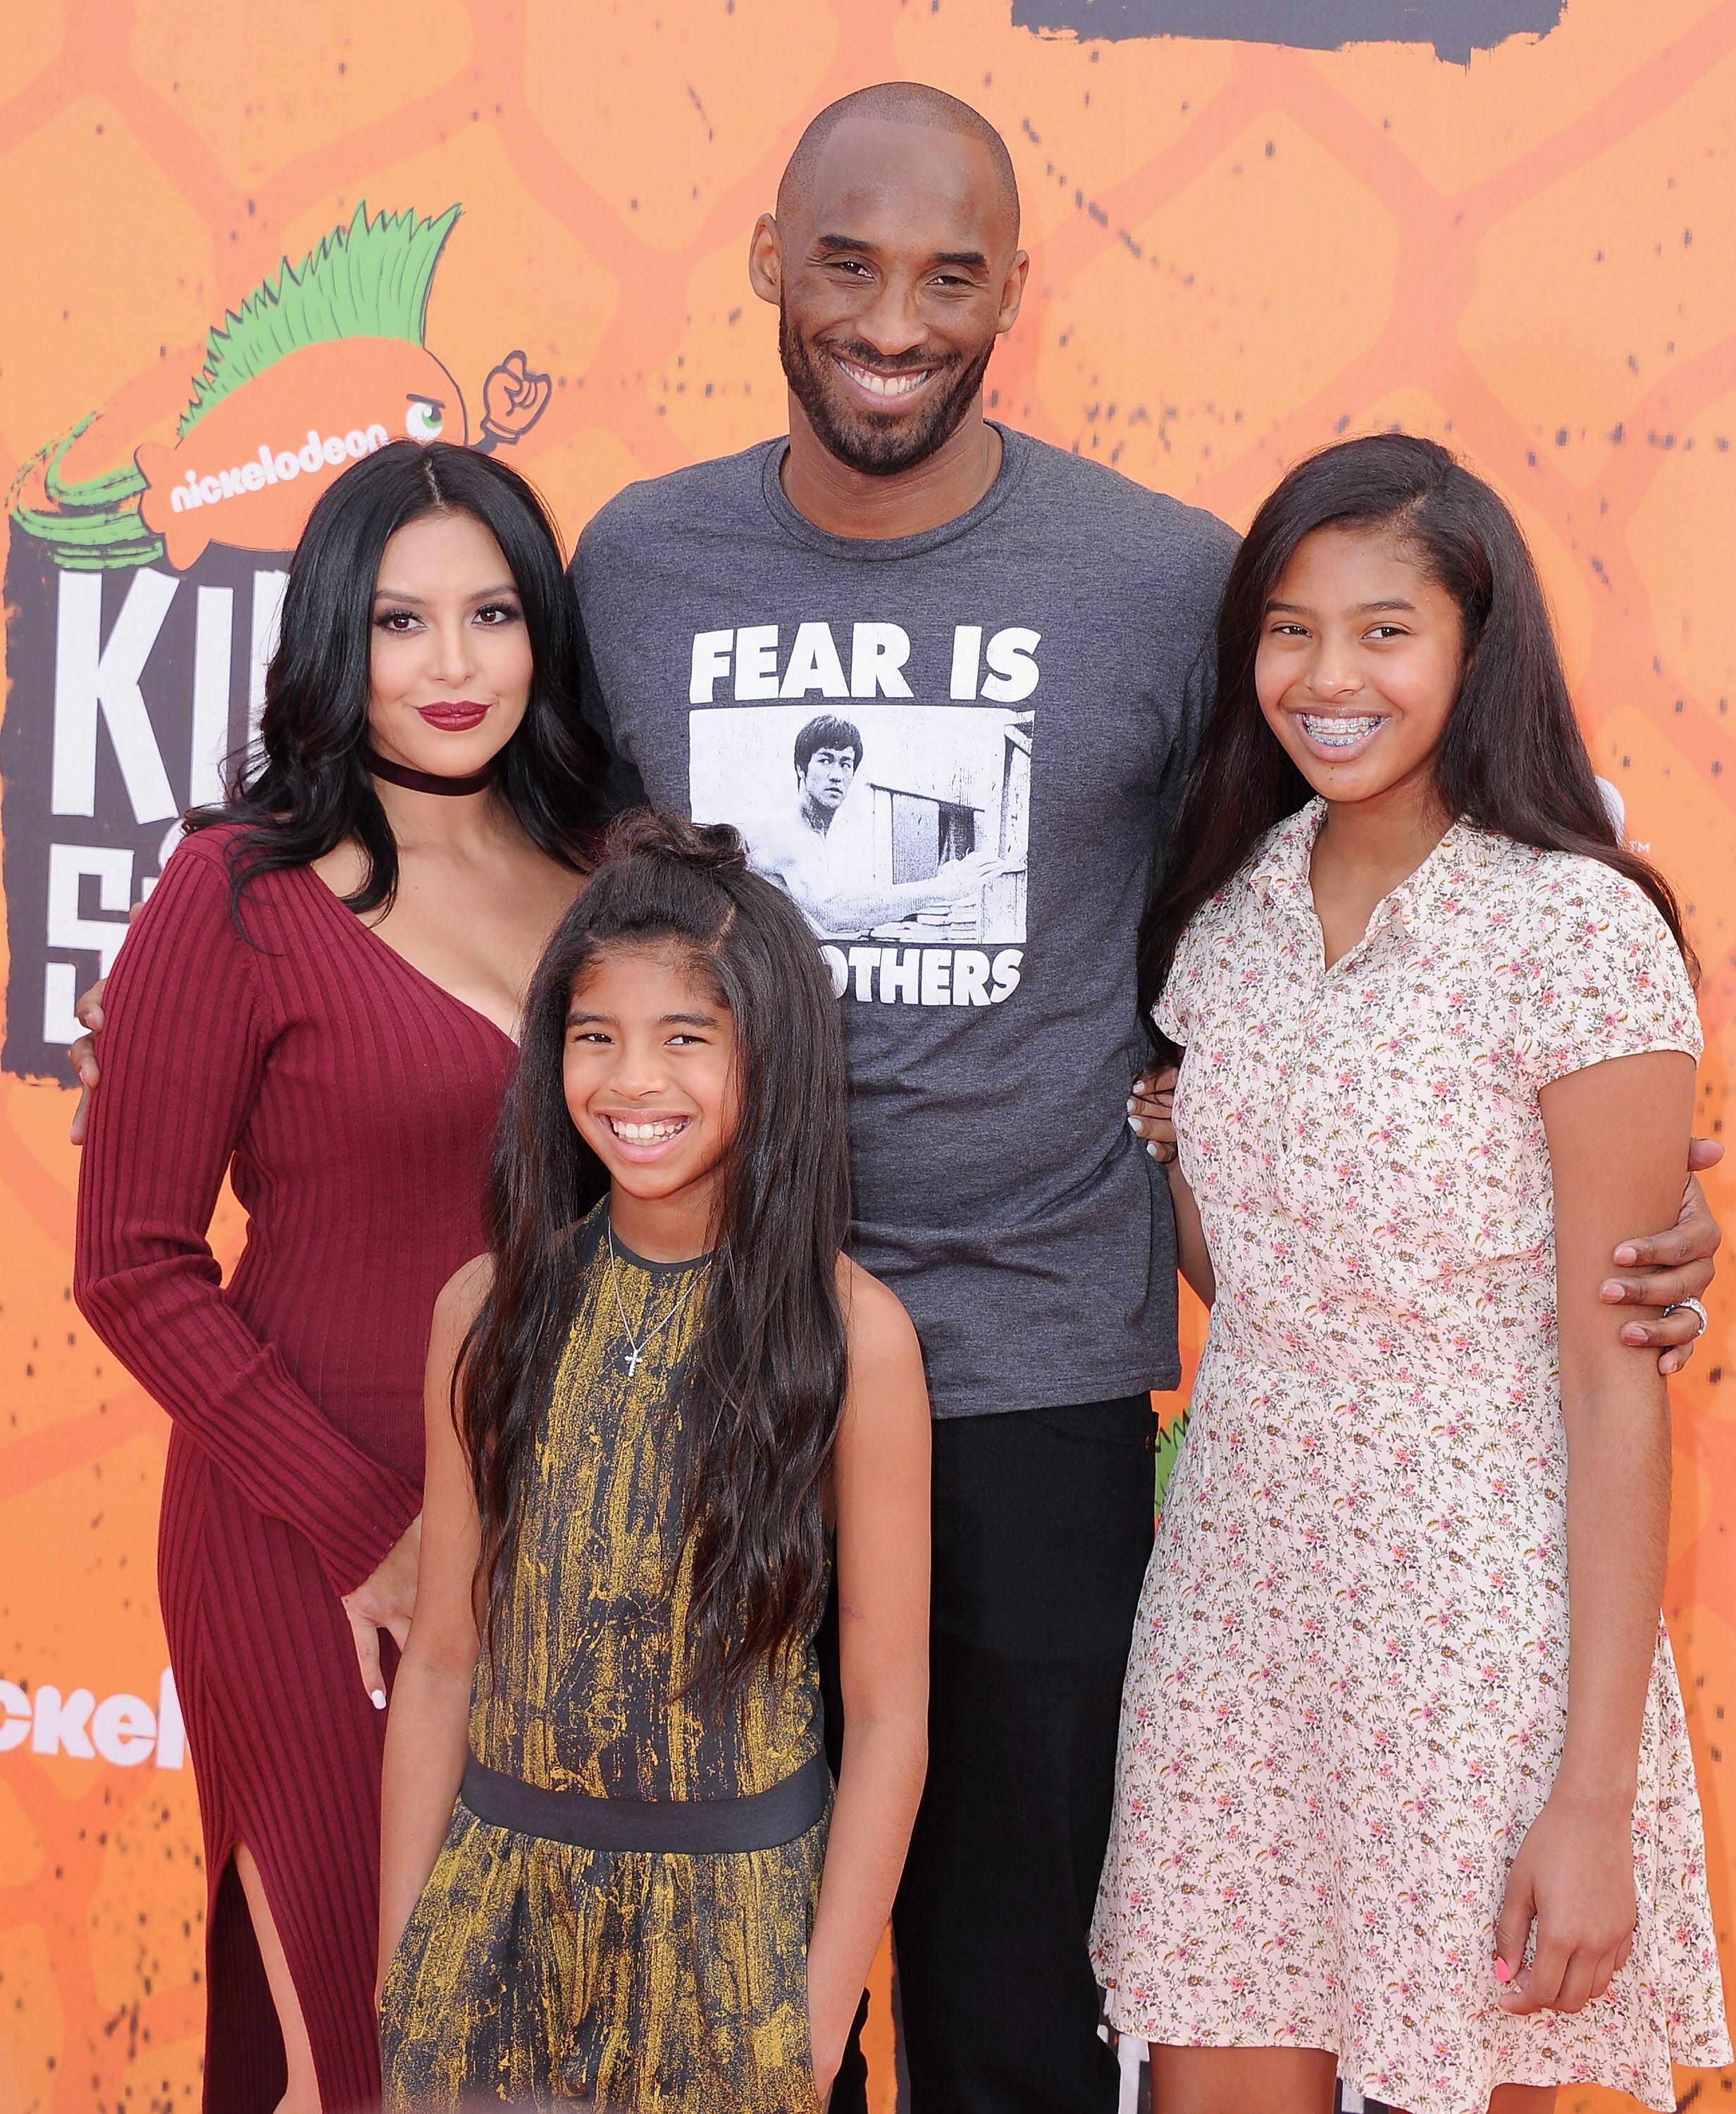  Kobe Bryant, wife Vanessa and daughters Gianna, and Natalia at the Nickelodeon Kids' Choice Sports Awards/ Source: Getty Images 